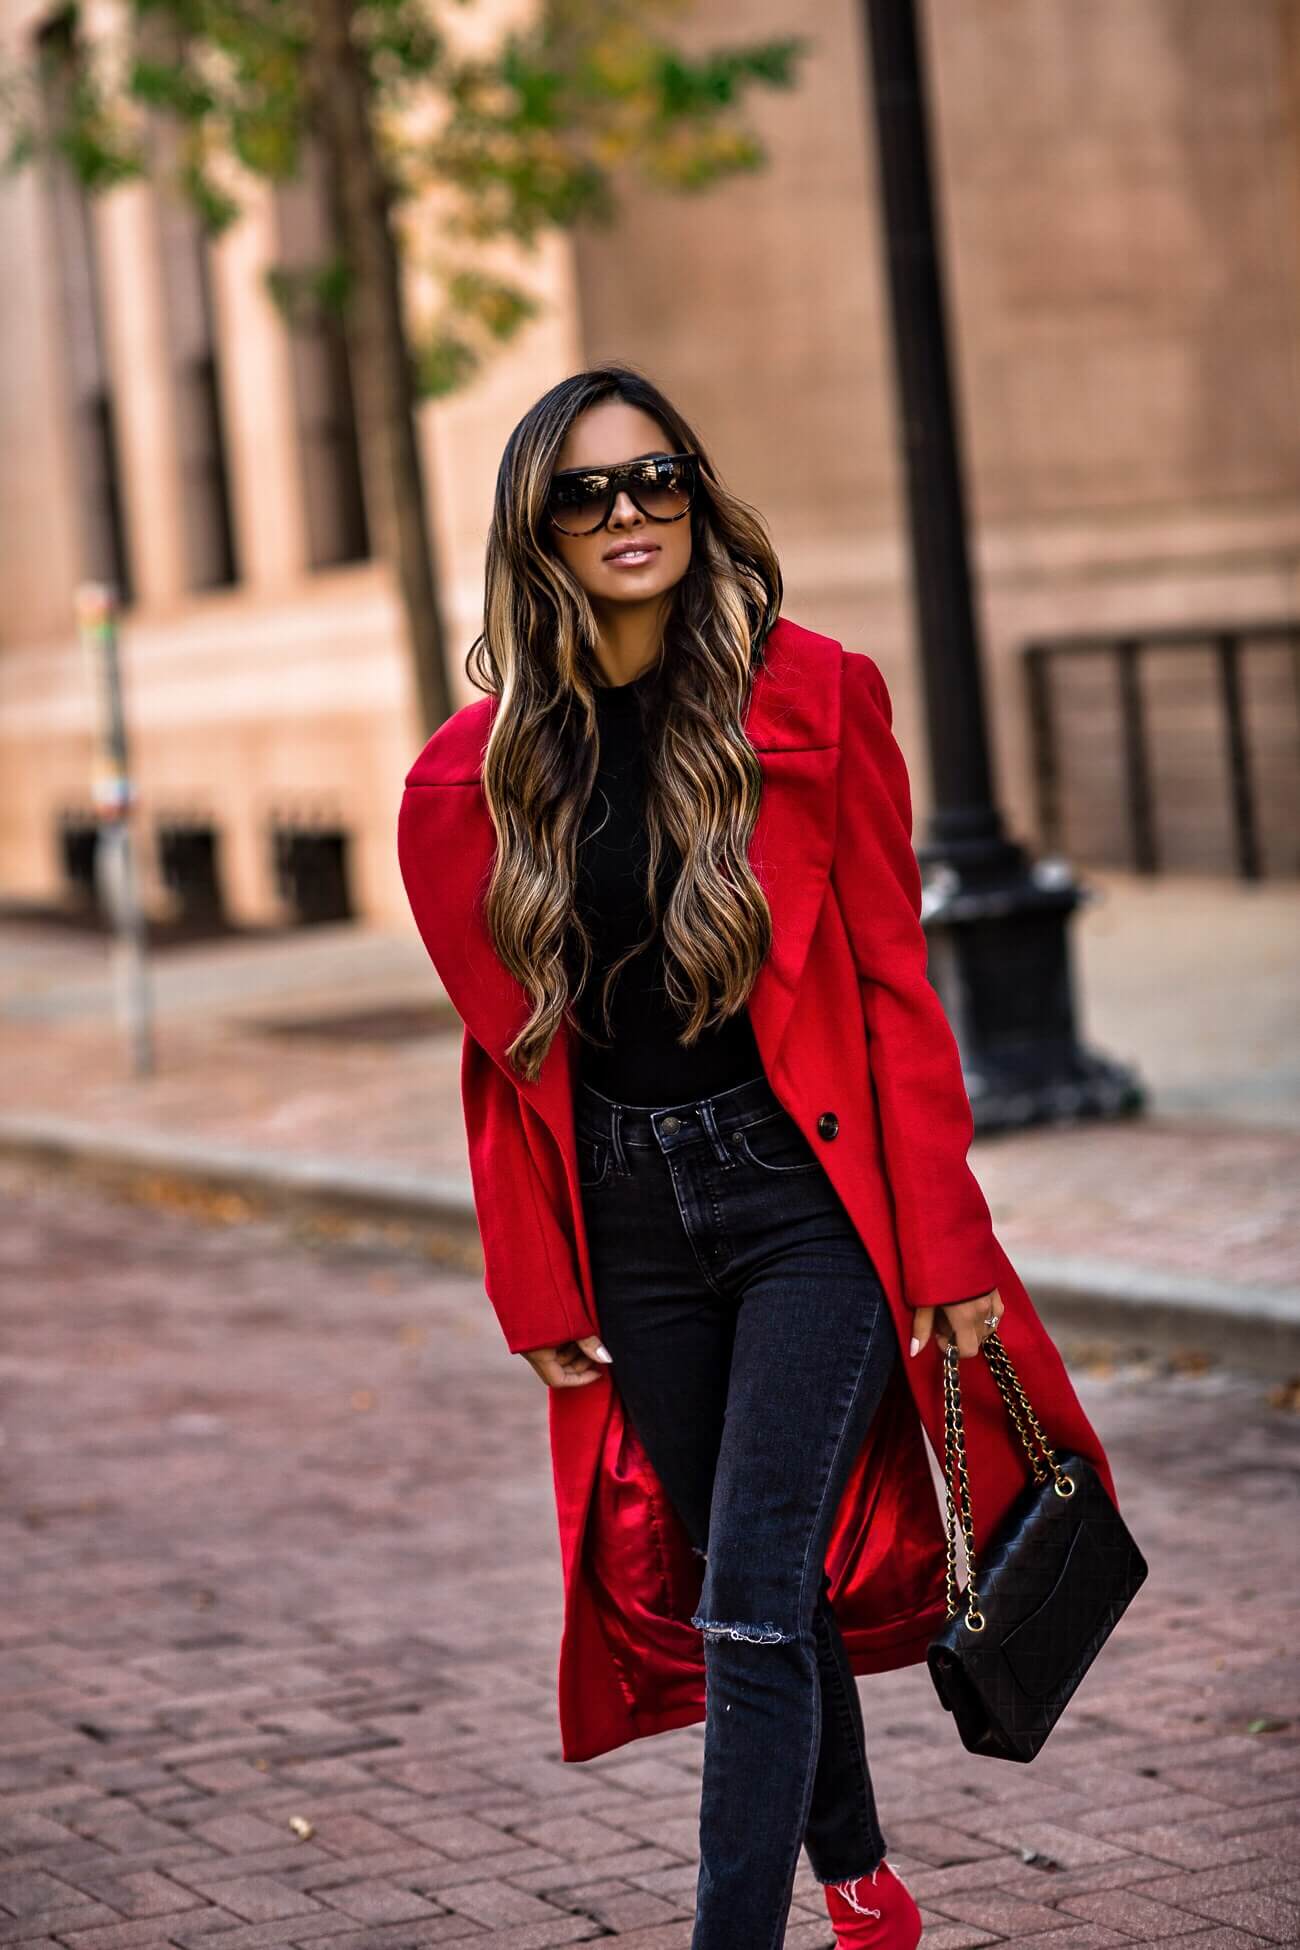 mia mia mine wearing a red kendall + kylie coat from bloomingdale's and a chanel bag